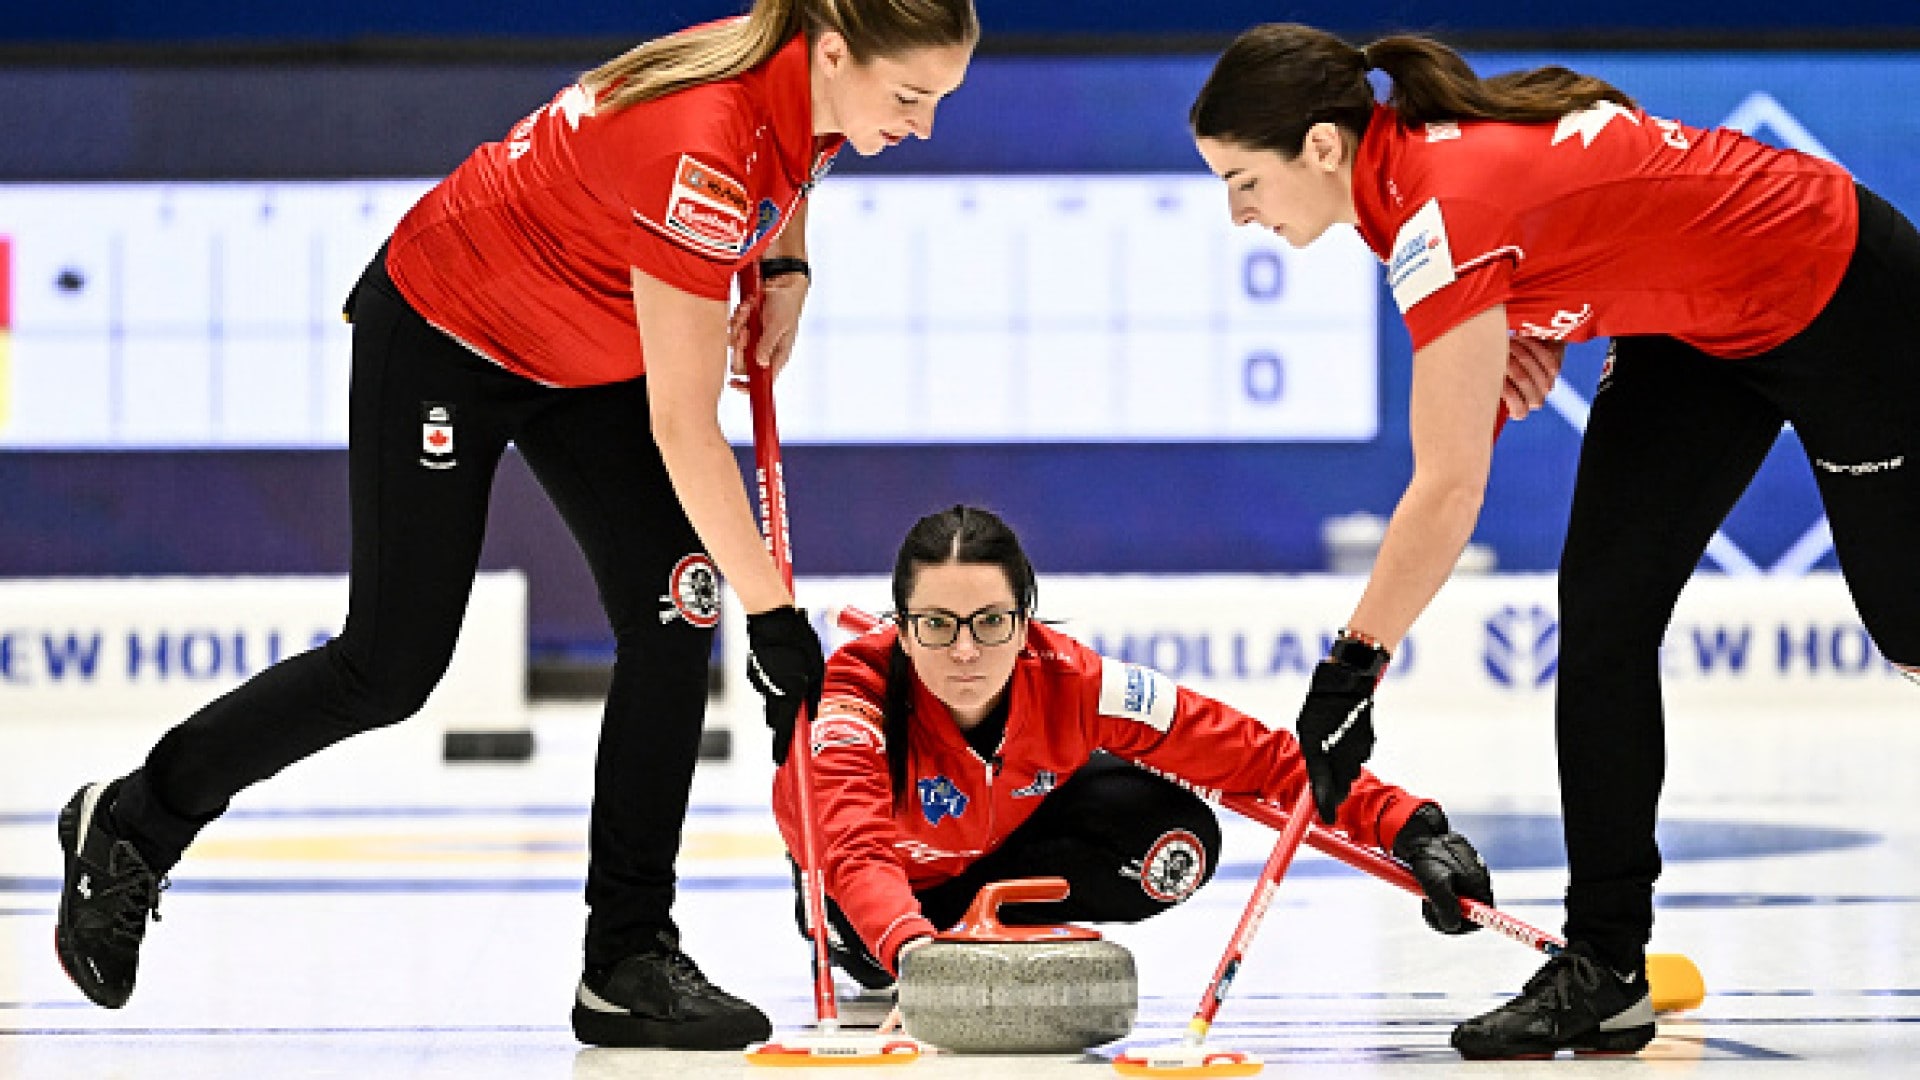 Einarson We want to bring gold back to Canada